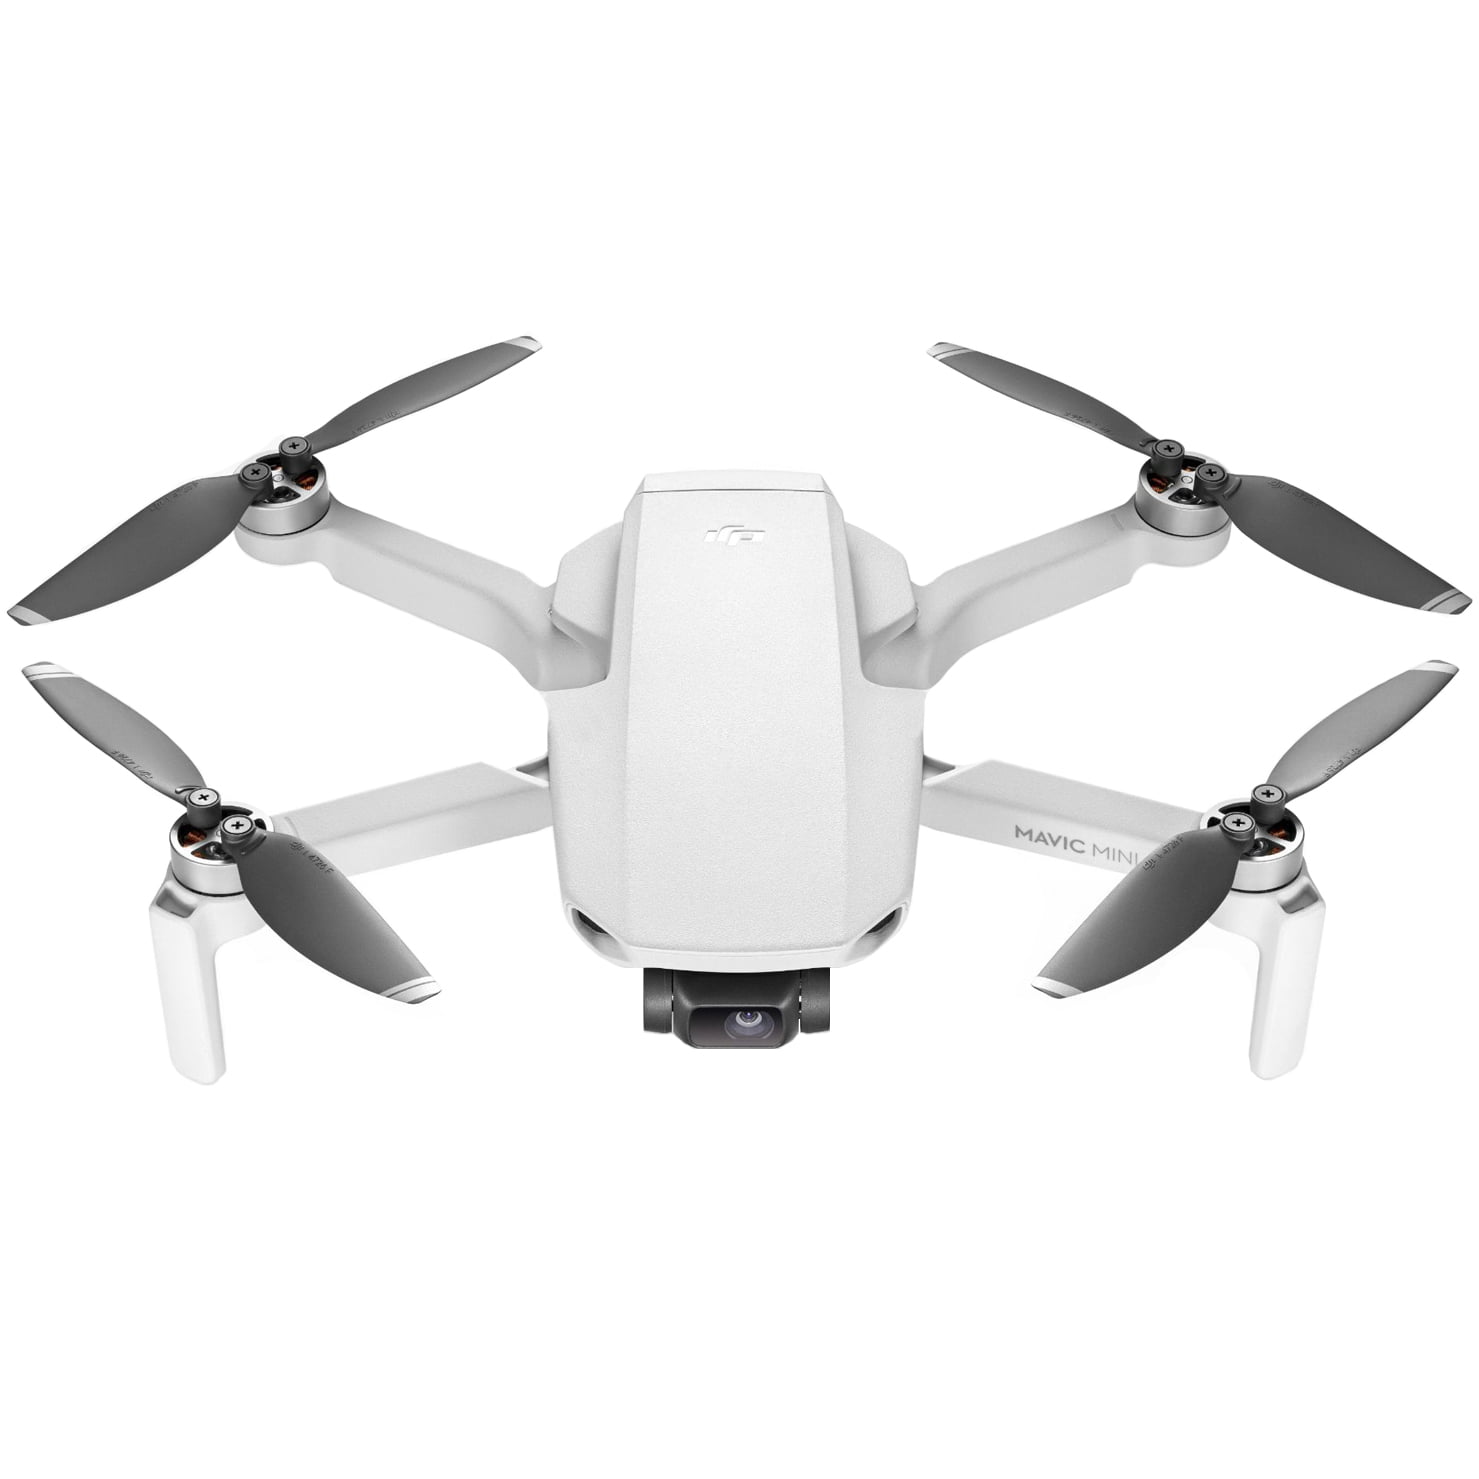 DJI CP.MA.00000123.01 Mavic Mini Quadcopter Drone Fly More Combo With One Year Warranty Bundle with Drone Landing Pad 64GB Memory Card and VR Viewer Renewed 